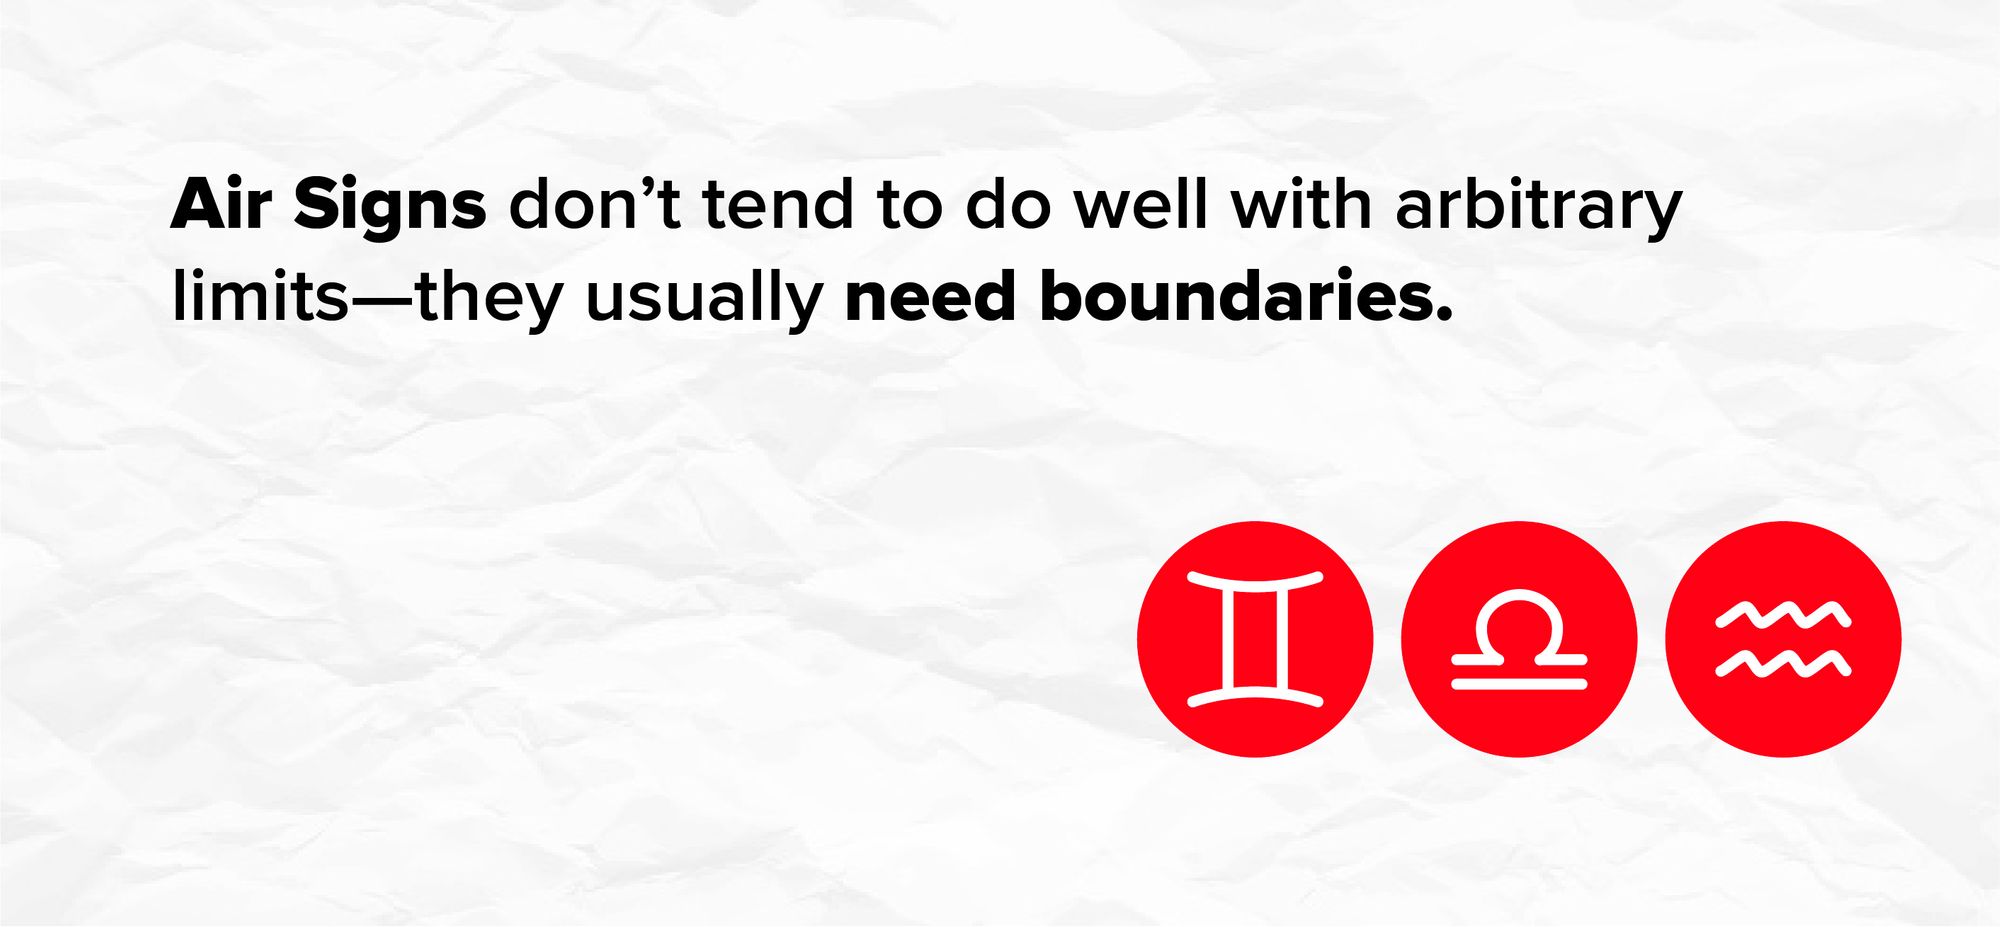 Air Signs don’t tend to do well with arbitrary limits—they usually need boundaries.